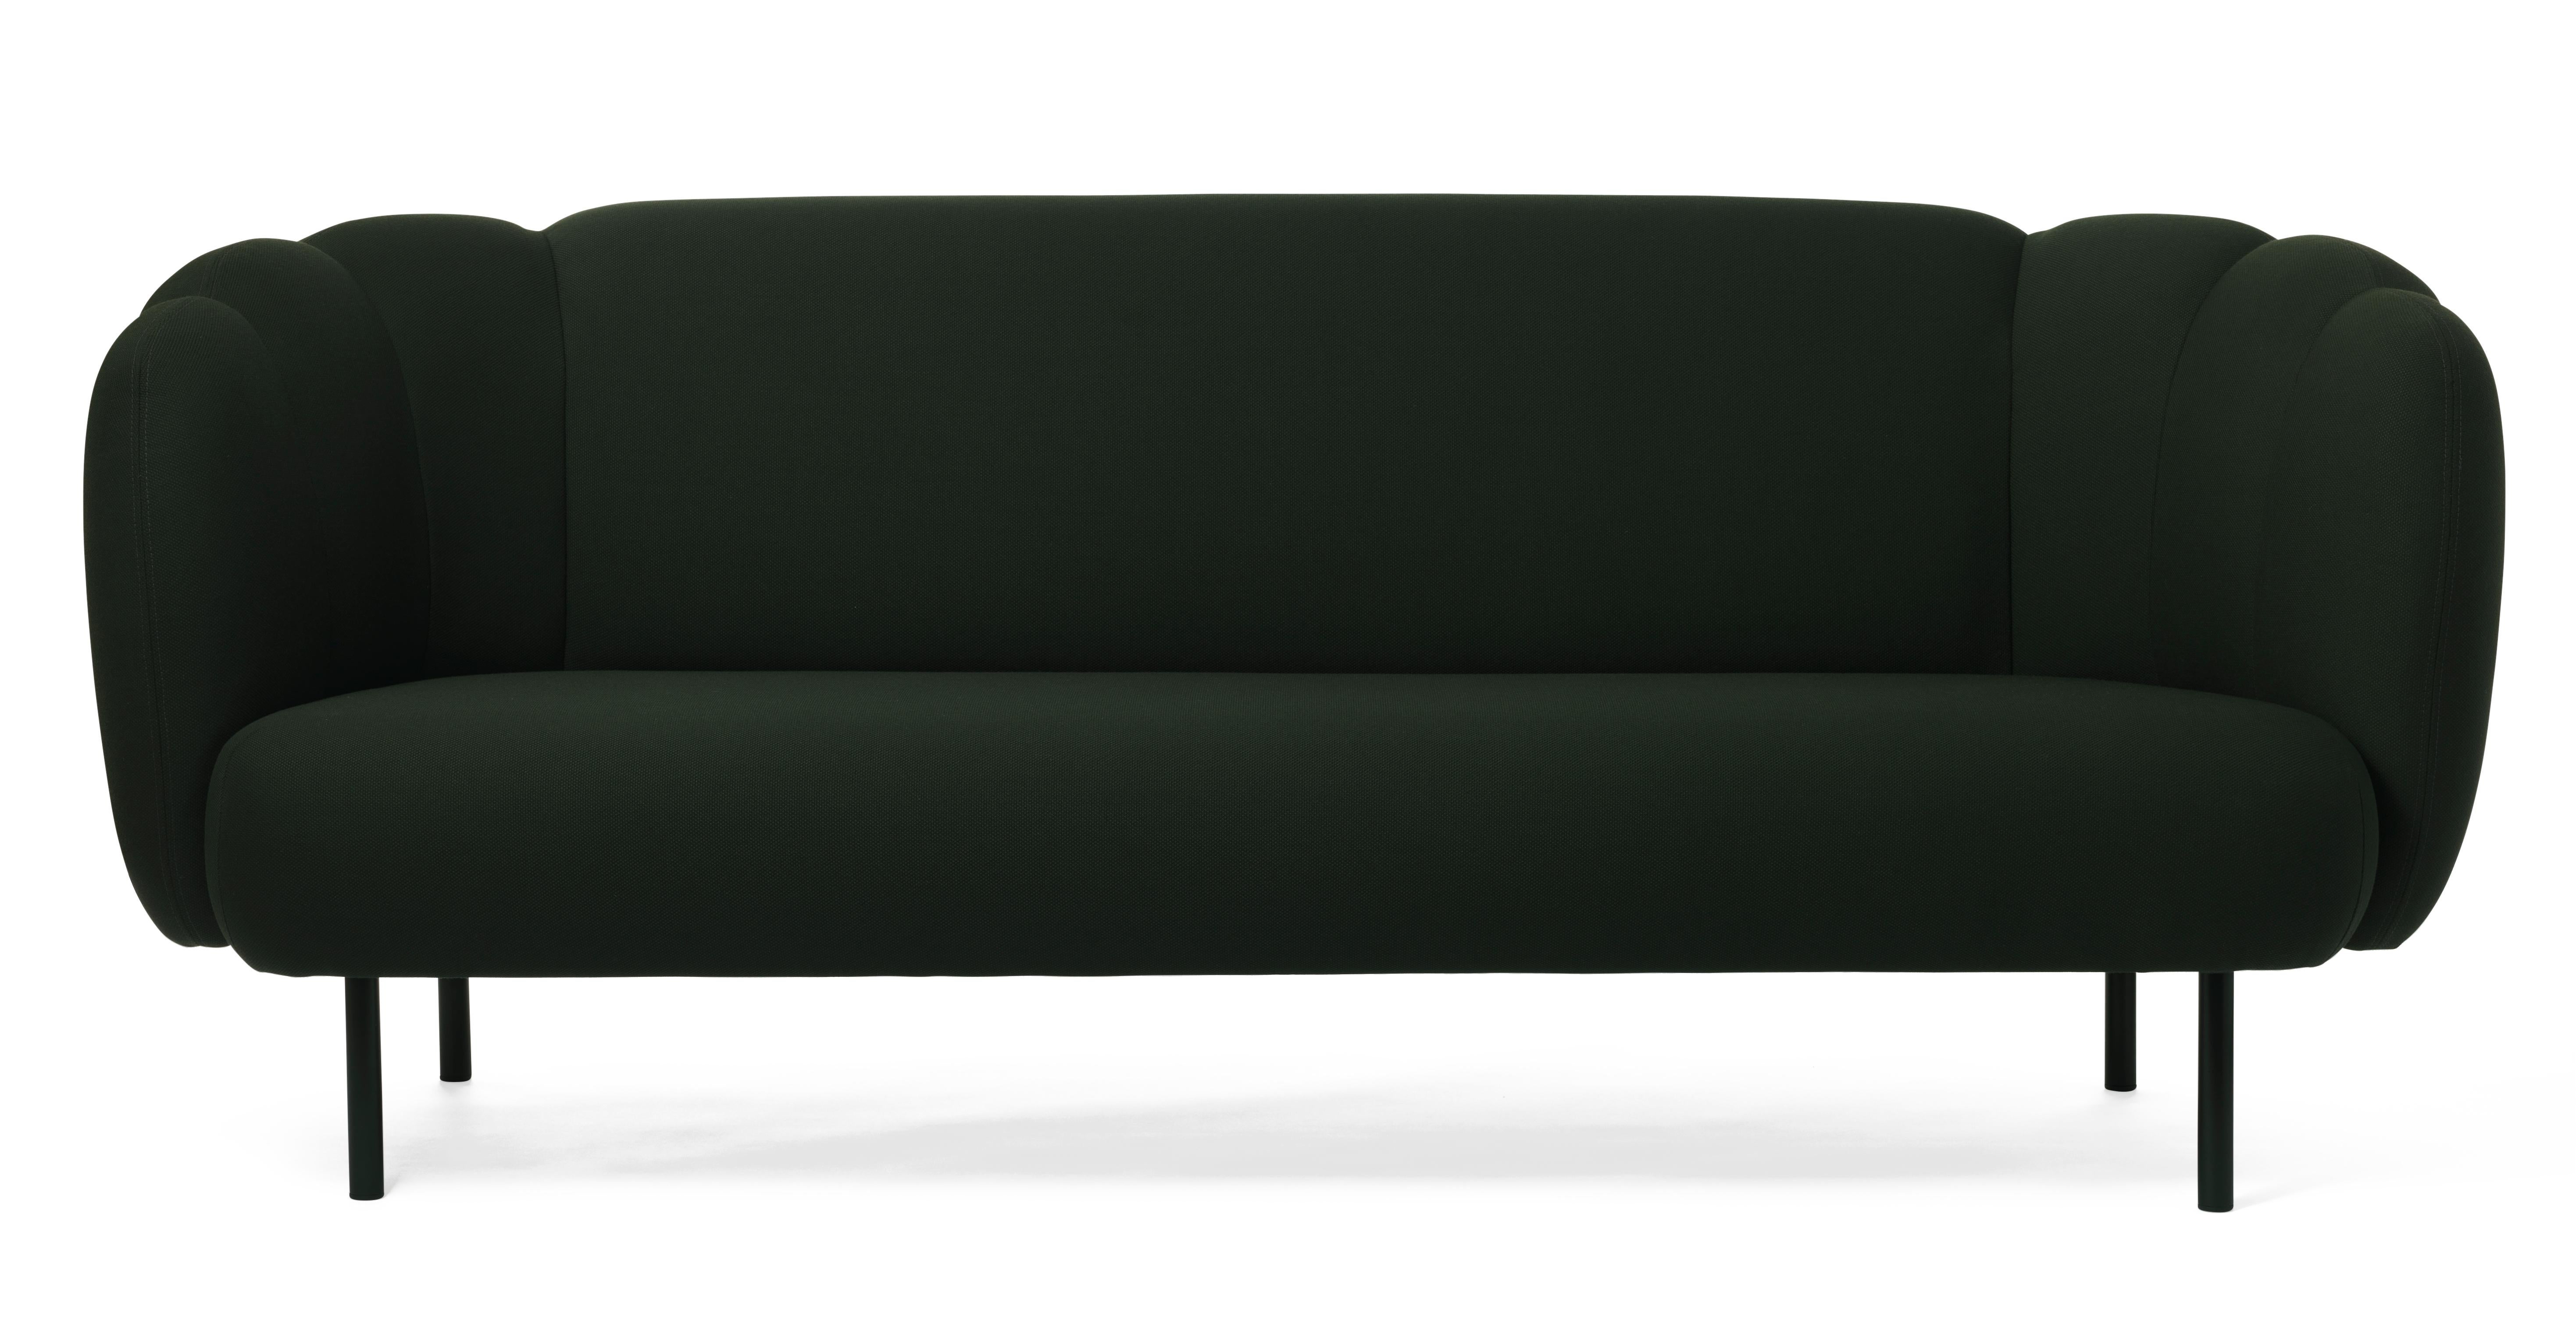 For Sale: Green (Steelcut 975) Cape 3-Seat Stitch Sofa, by Charlotte Høncke from Warm Nordic